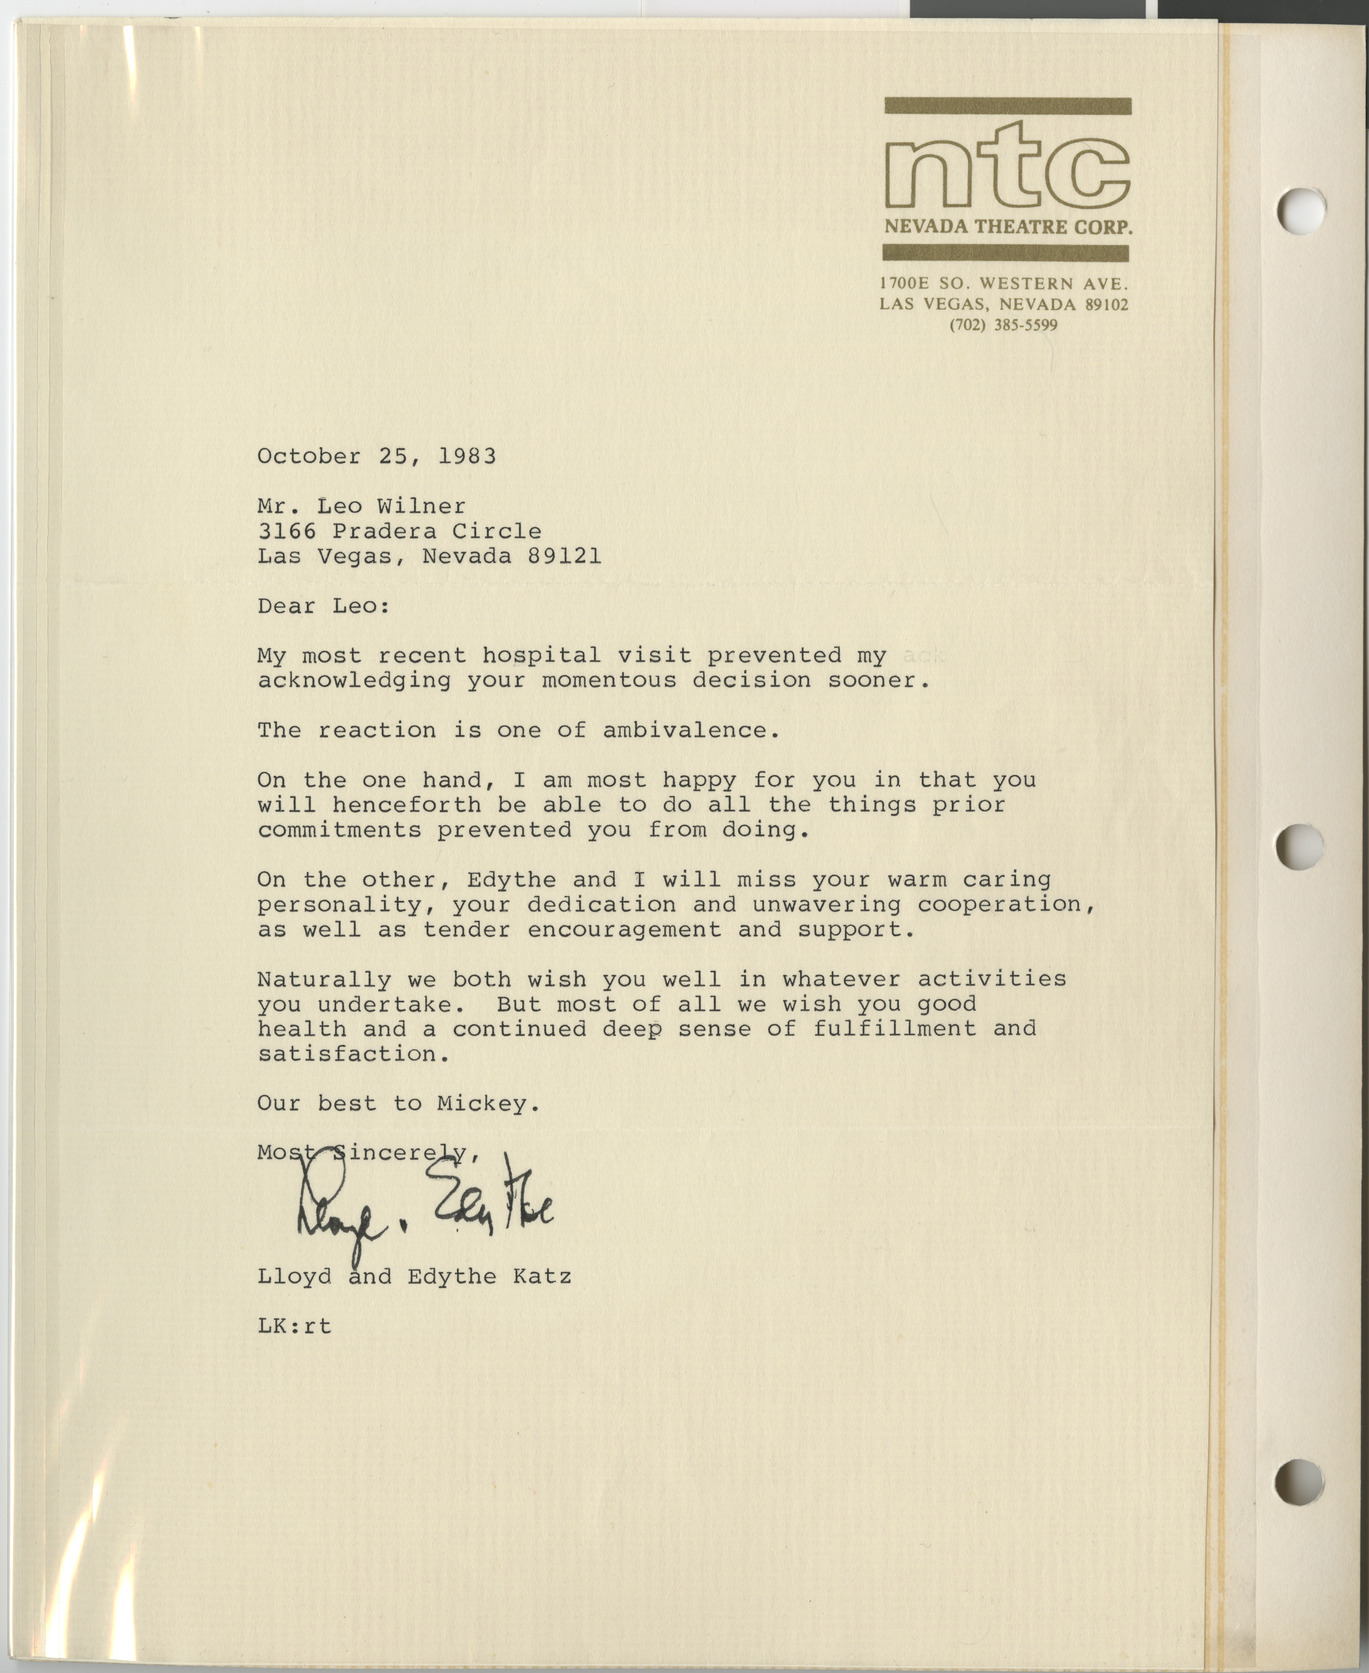 Letter from Lloyd and Edythe Katz (Nevada Theatre Corp., Las Vegas, Nev.) to Leo Wilner, October 25, 1983